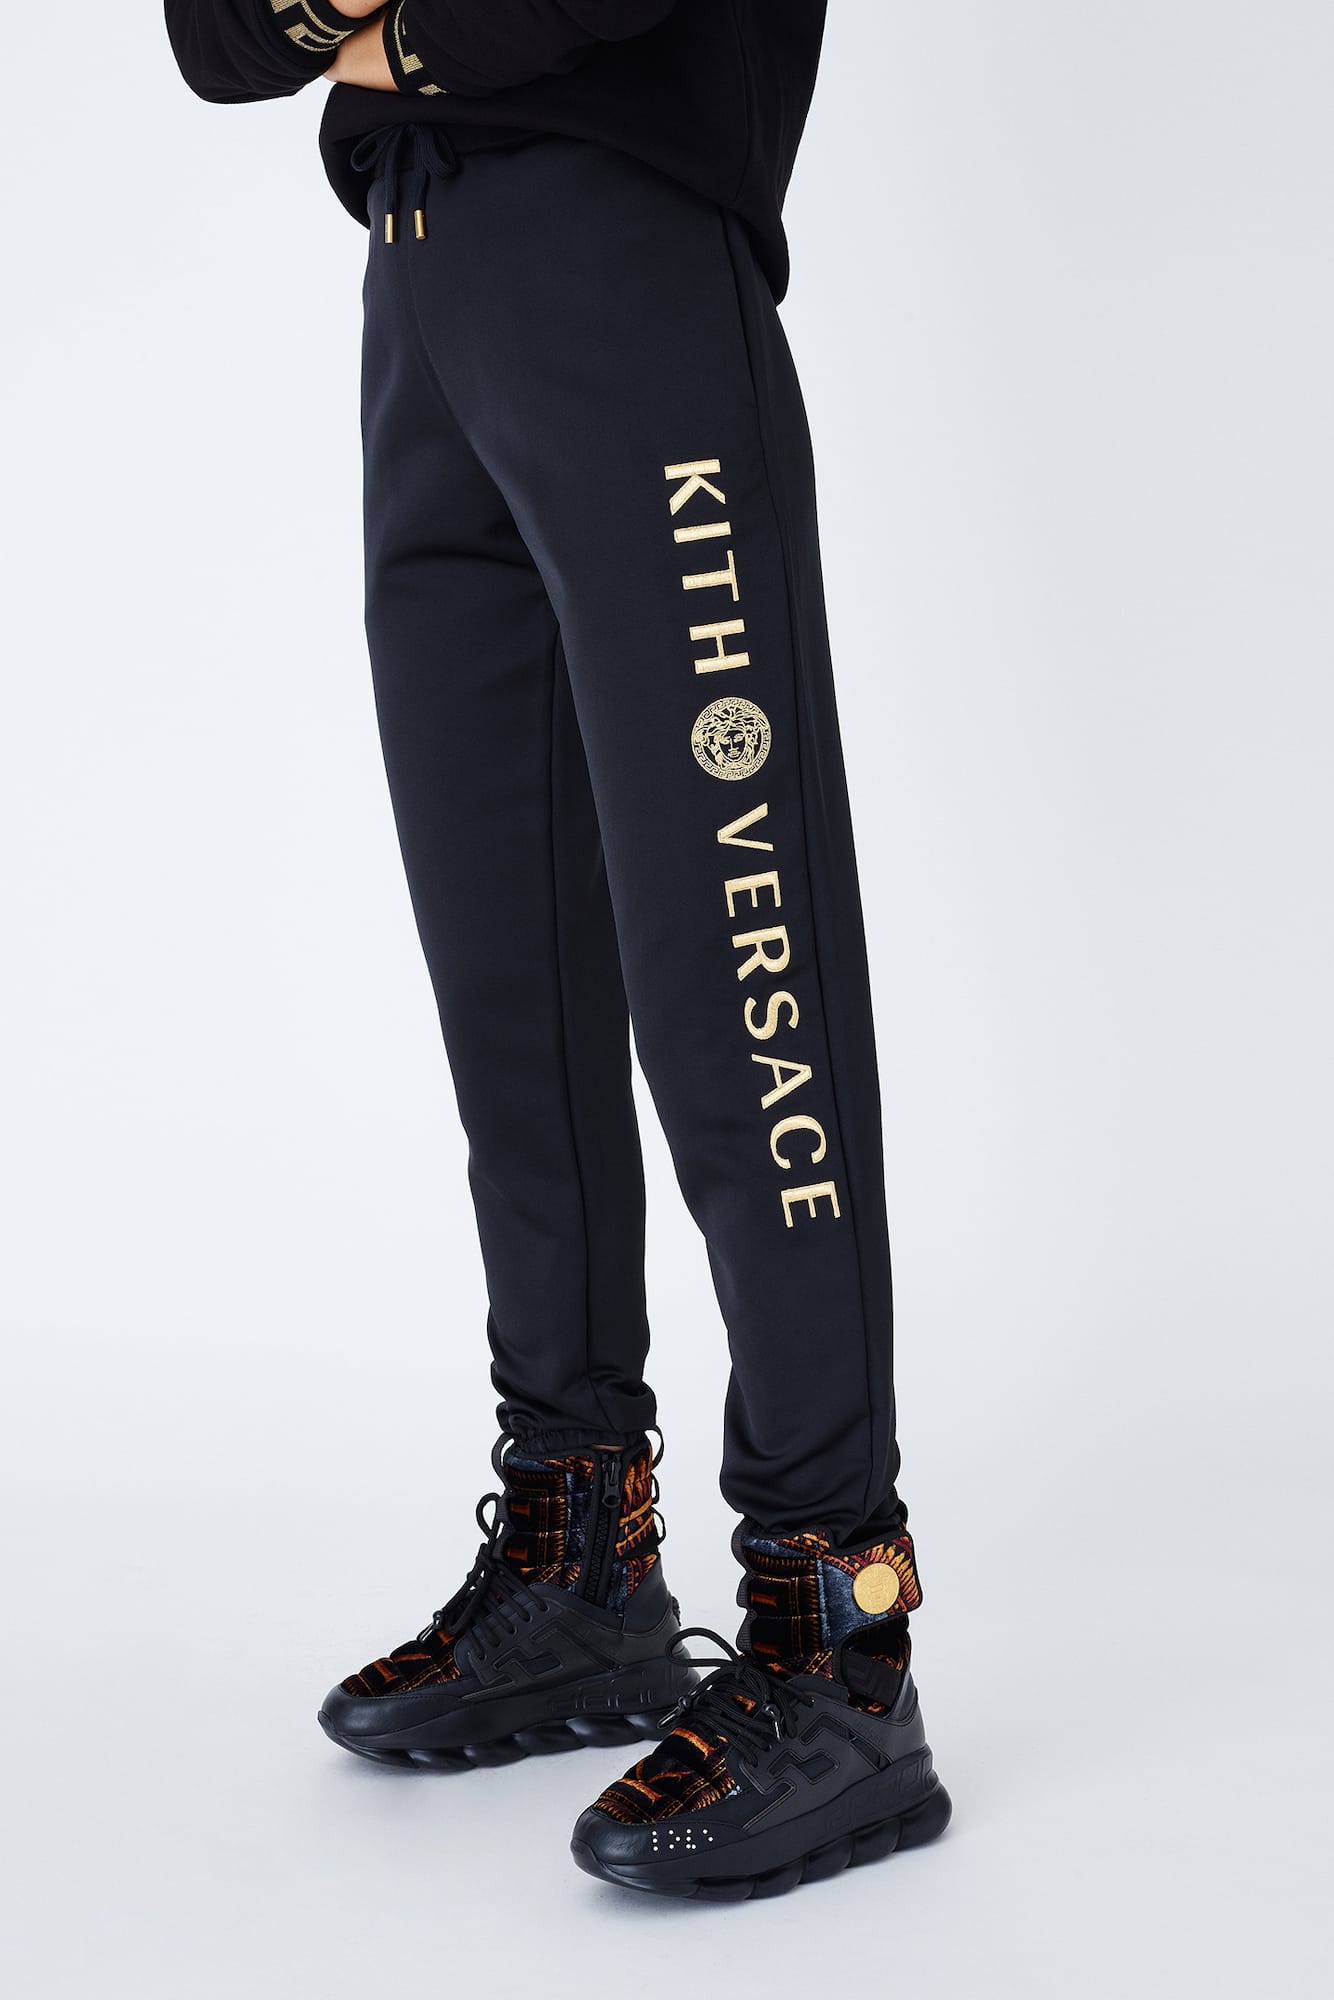 kith versace release